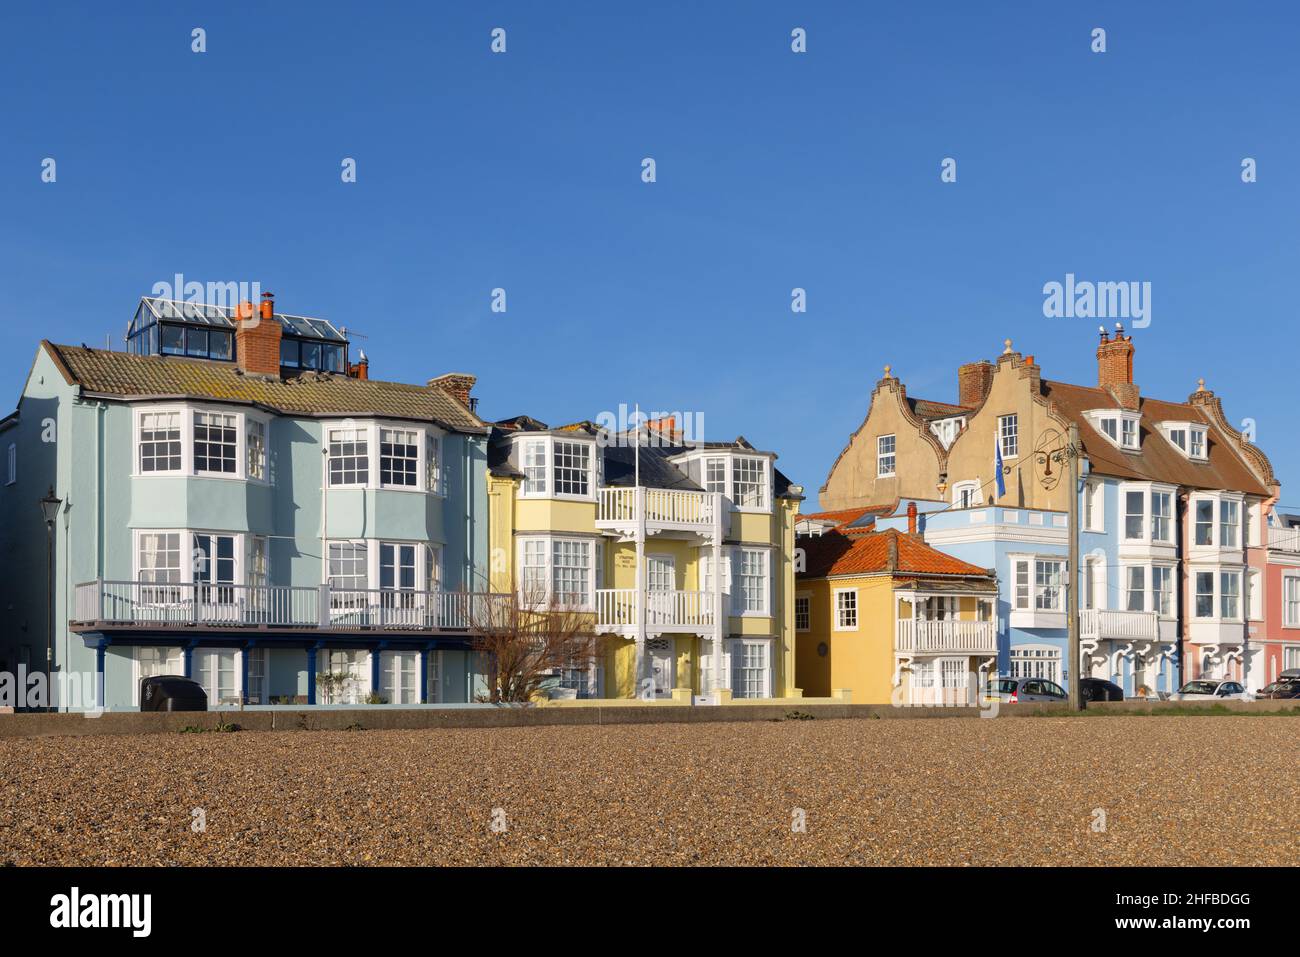 View of the colourful buildings on Crag Path facing the seafront in Aldeburgh. UK Stock Photo